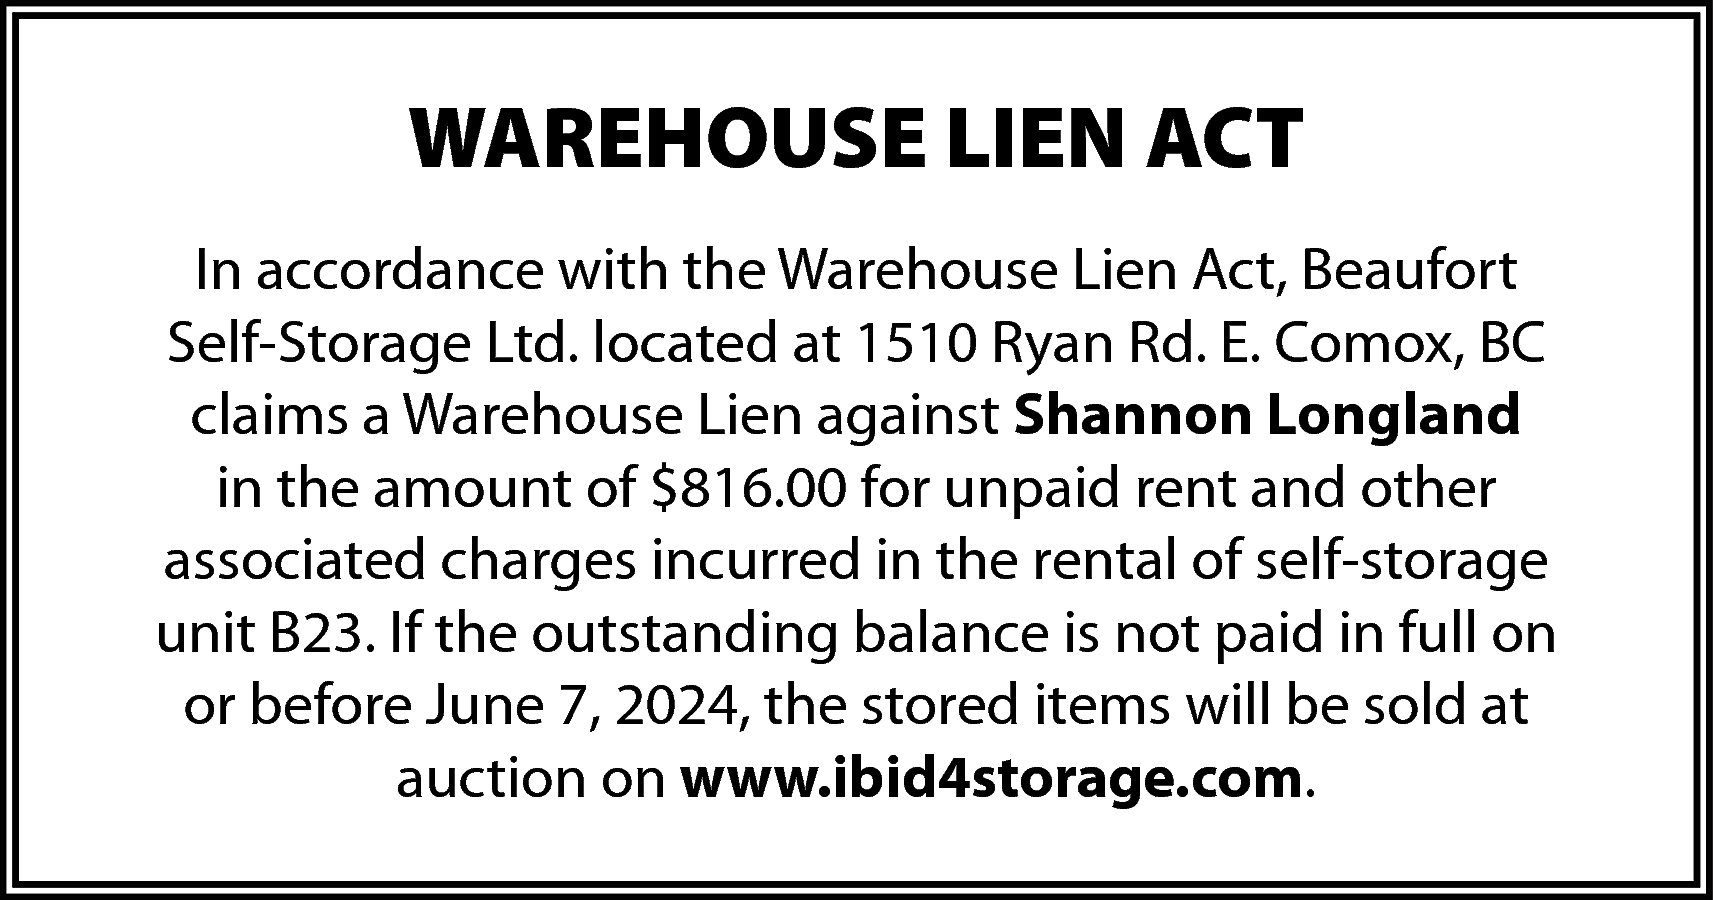 WAREHOUSE LIEN ACT <br>In accordance  WAREHOUSE LIEN ACT  In accordance with the Warehouse Lien Act, Beaufort  Self-Storage Ltd. located at 1510 Ryan Rd. E. Comox, BC  claims a Warehouse Lien against Shannon Longland  in the amount of $816.00 for unpaid rent and other  associated charges incurred in the rental of self-storage  unit B23. If the outstanding balance is not paid in full on  or before June 7, 2024, the stored items will be sold at  auction on www.ibid4storage.com.    